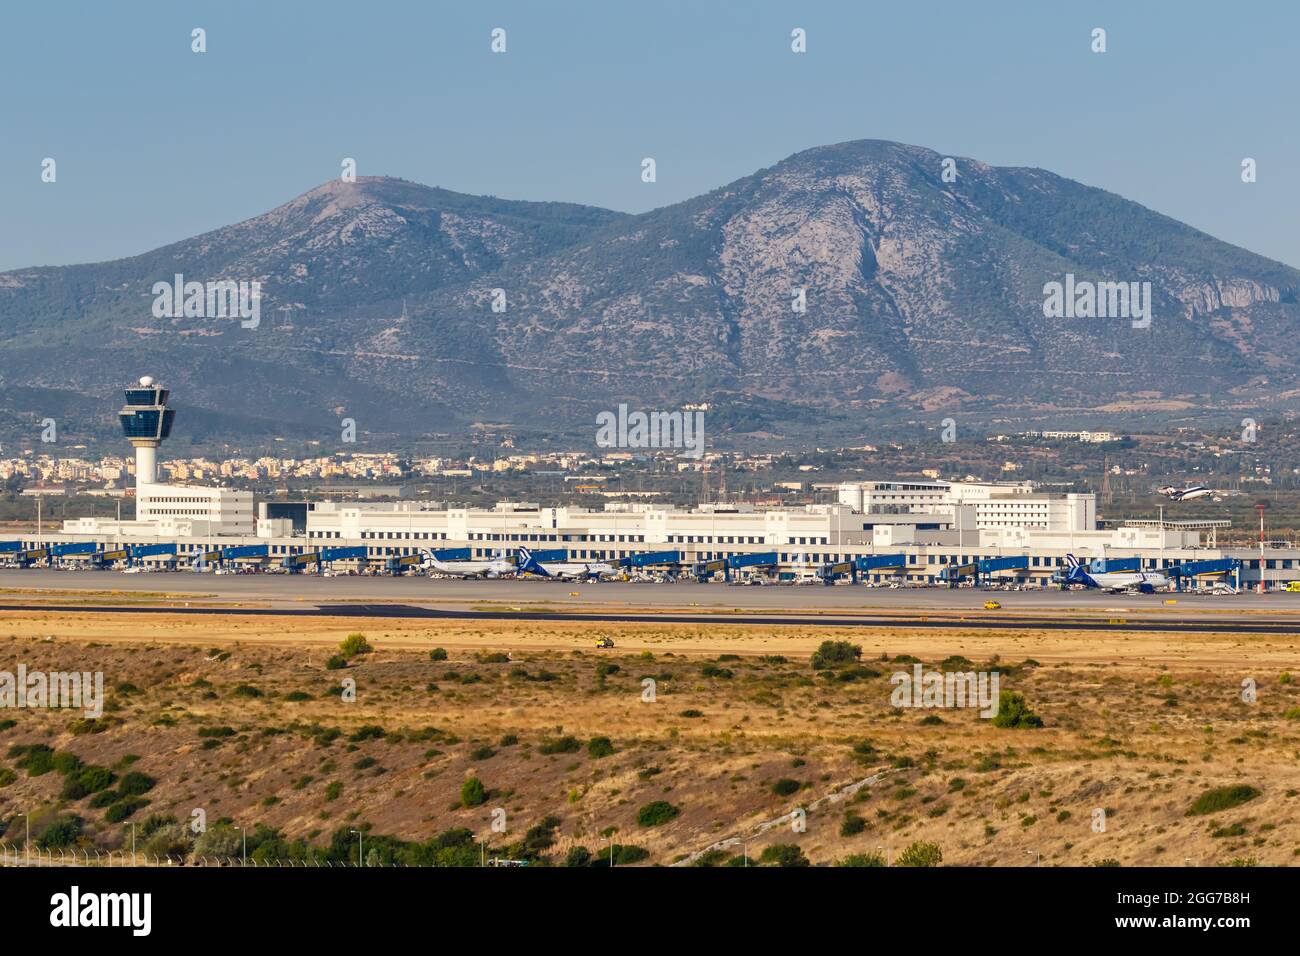 Athens, Greece - September 22, 2020: Aegean Airlines Airbus airplanes at Athens airport (ATH) in Greece. Stock Photo